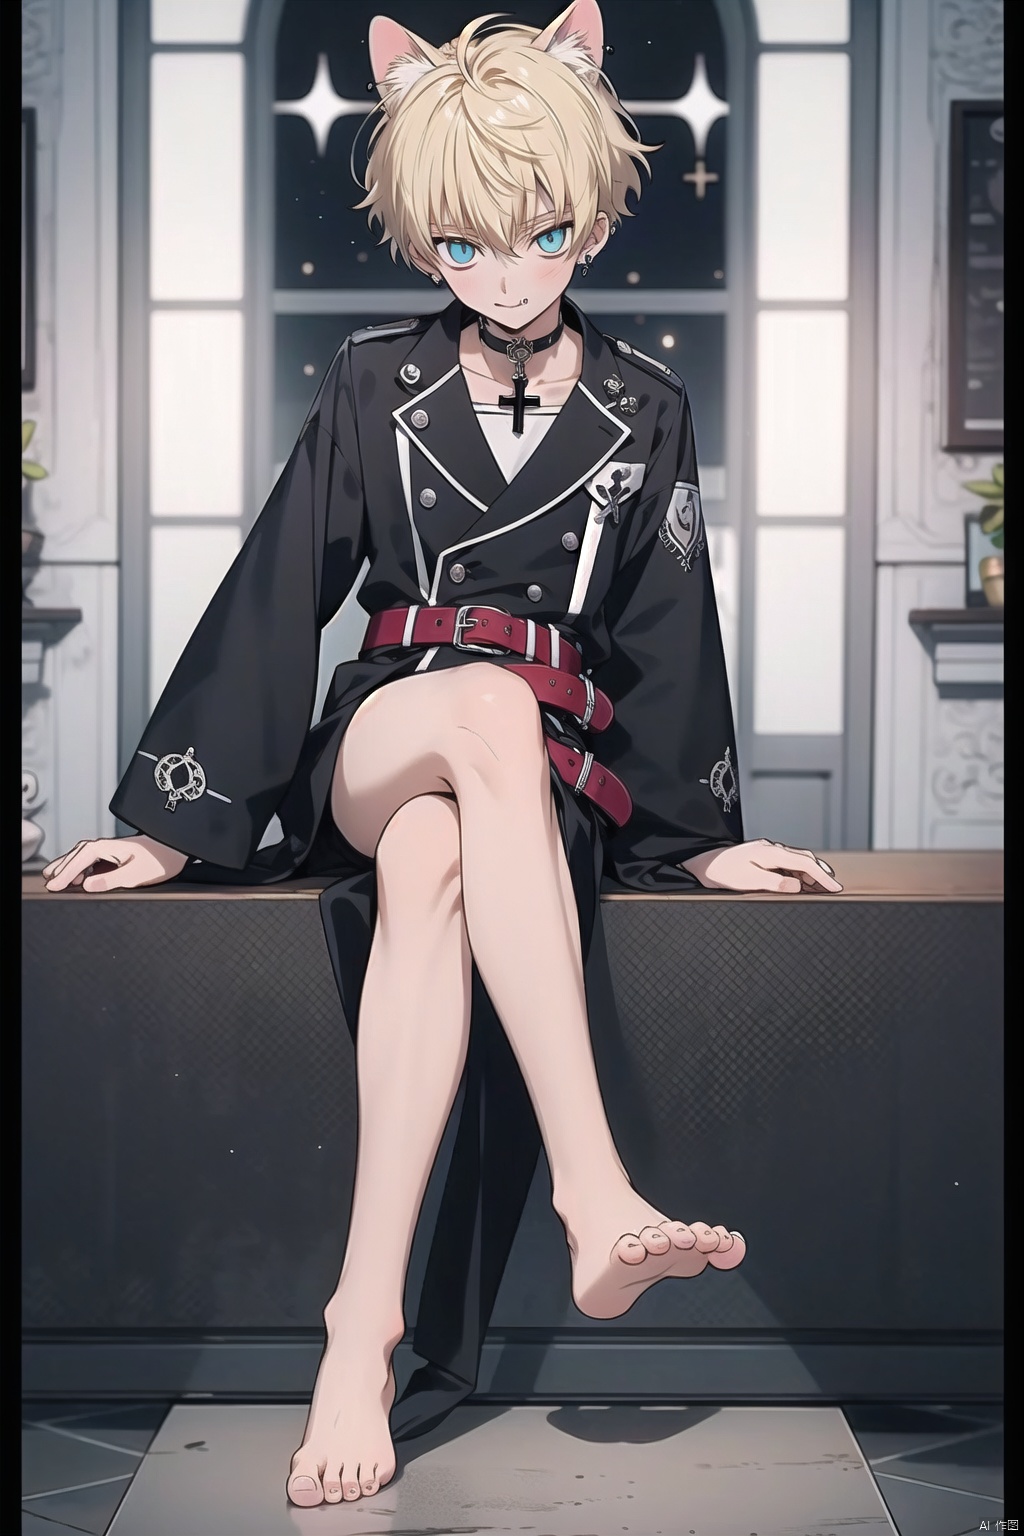  1boy,(18 year old),yellow_hair,cat ears, bare legs,bare_feet,young_human,happiness!,code_geass,home, 1male,slim,sitting onrailing,belt collar,g-string,gothic,scar,cross choker,冷白皮,tongue piercing,饰品